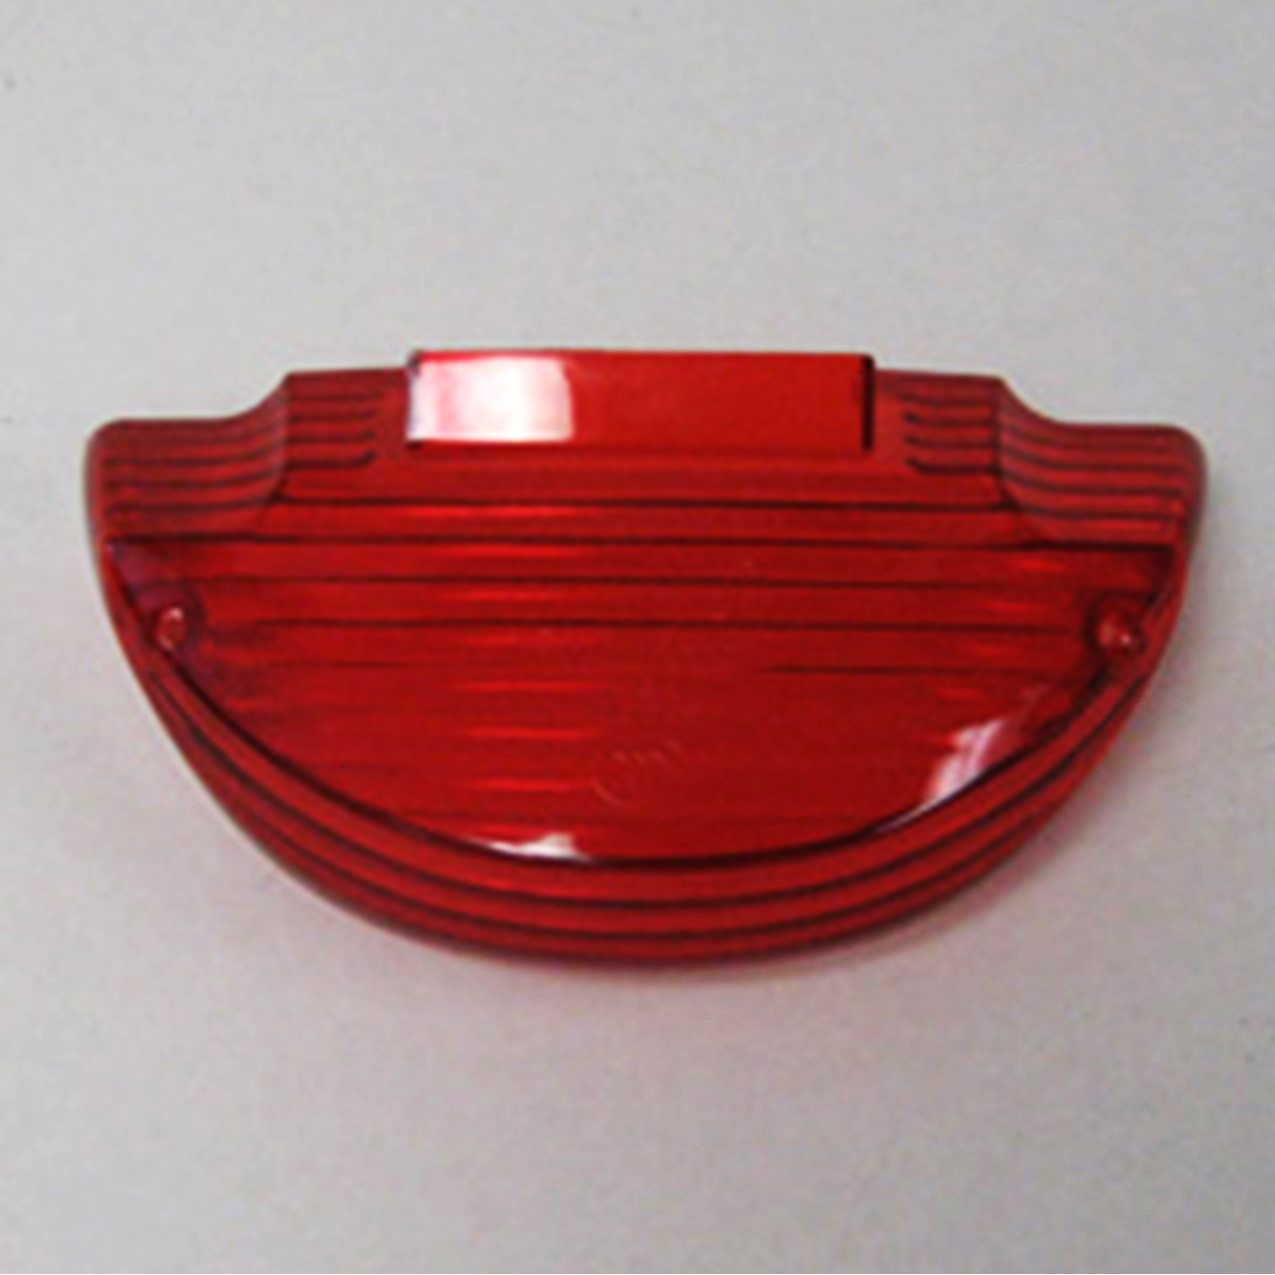 Tail Light Lens Fits Tao Tao CY50 (VIP) + others, (Clear lens not included) Bolt spacing ctr to ctr=147mm (5-3/4")